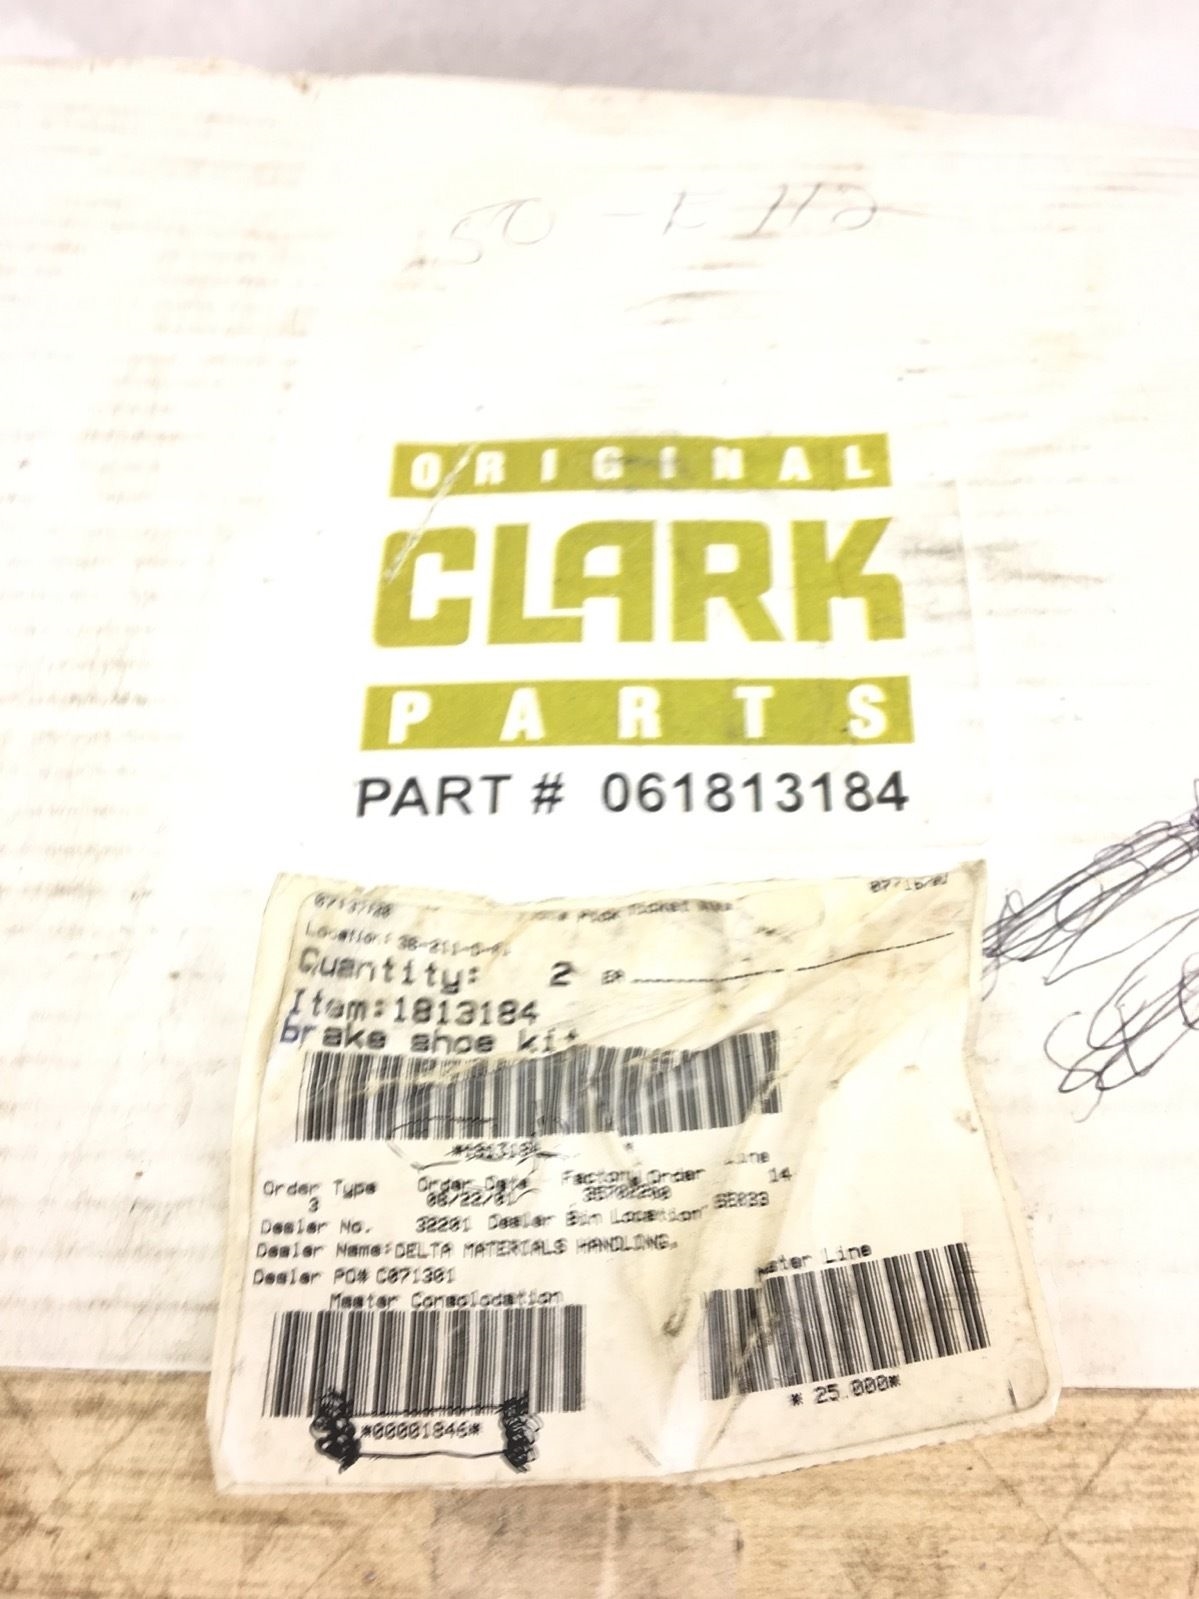 NEW IN BOX CLARK 1813184 BRAKE SHOE SET, TOTAL OF 4, FAST SHIPPING! (B350) 2